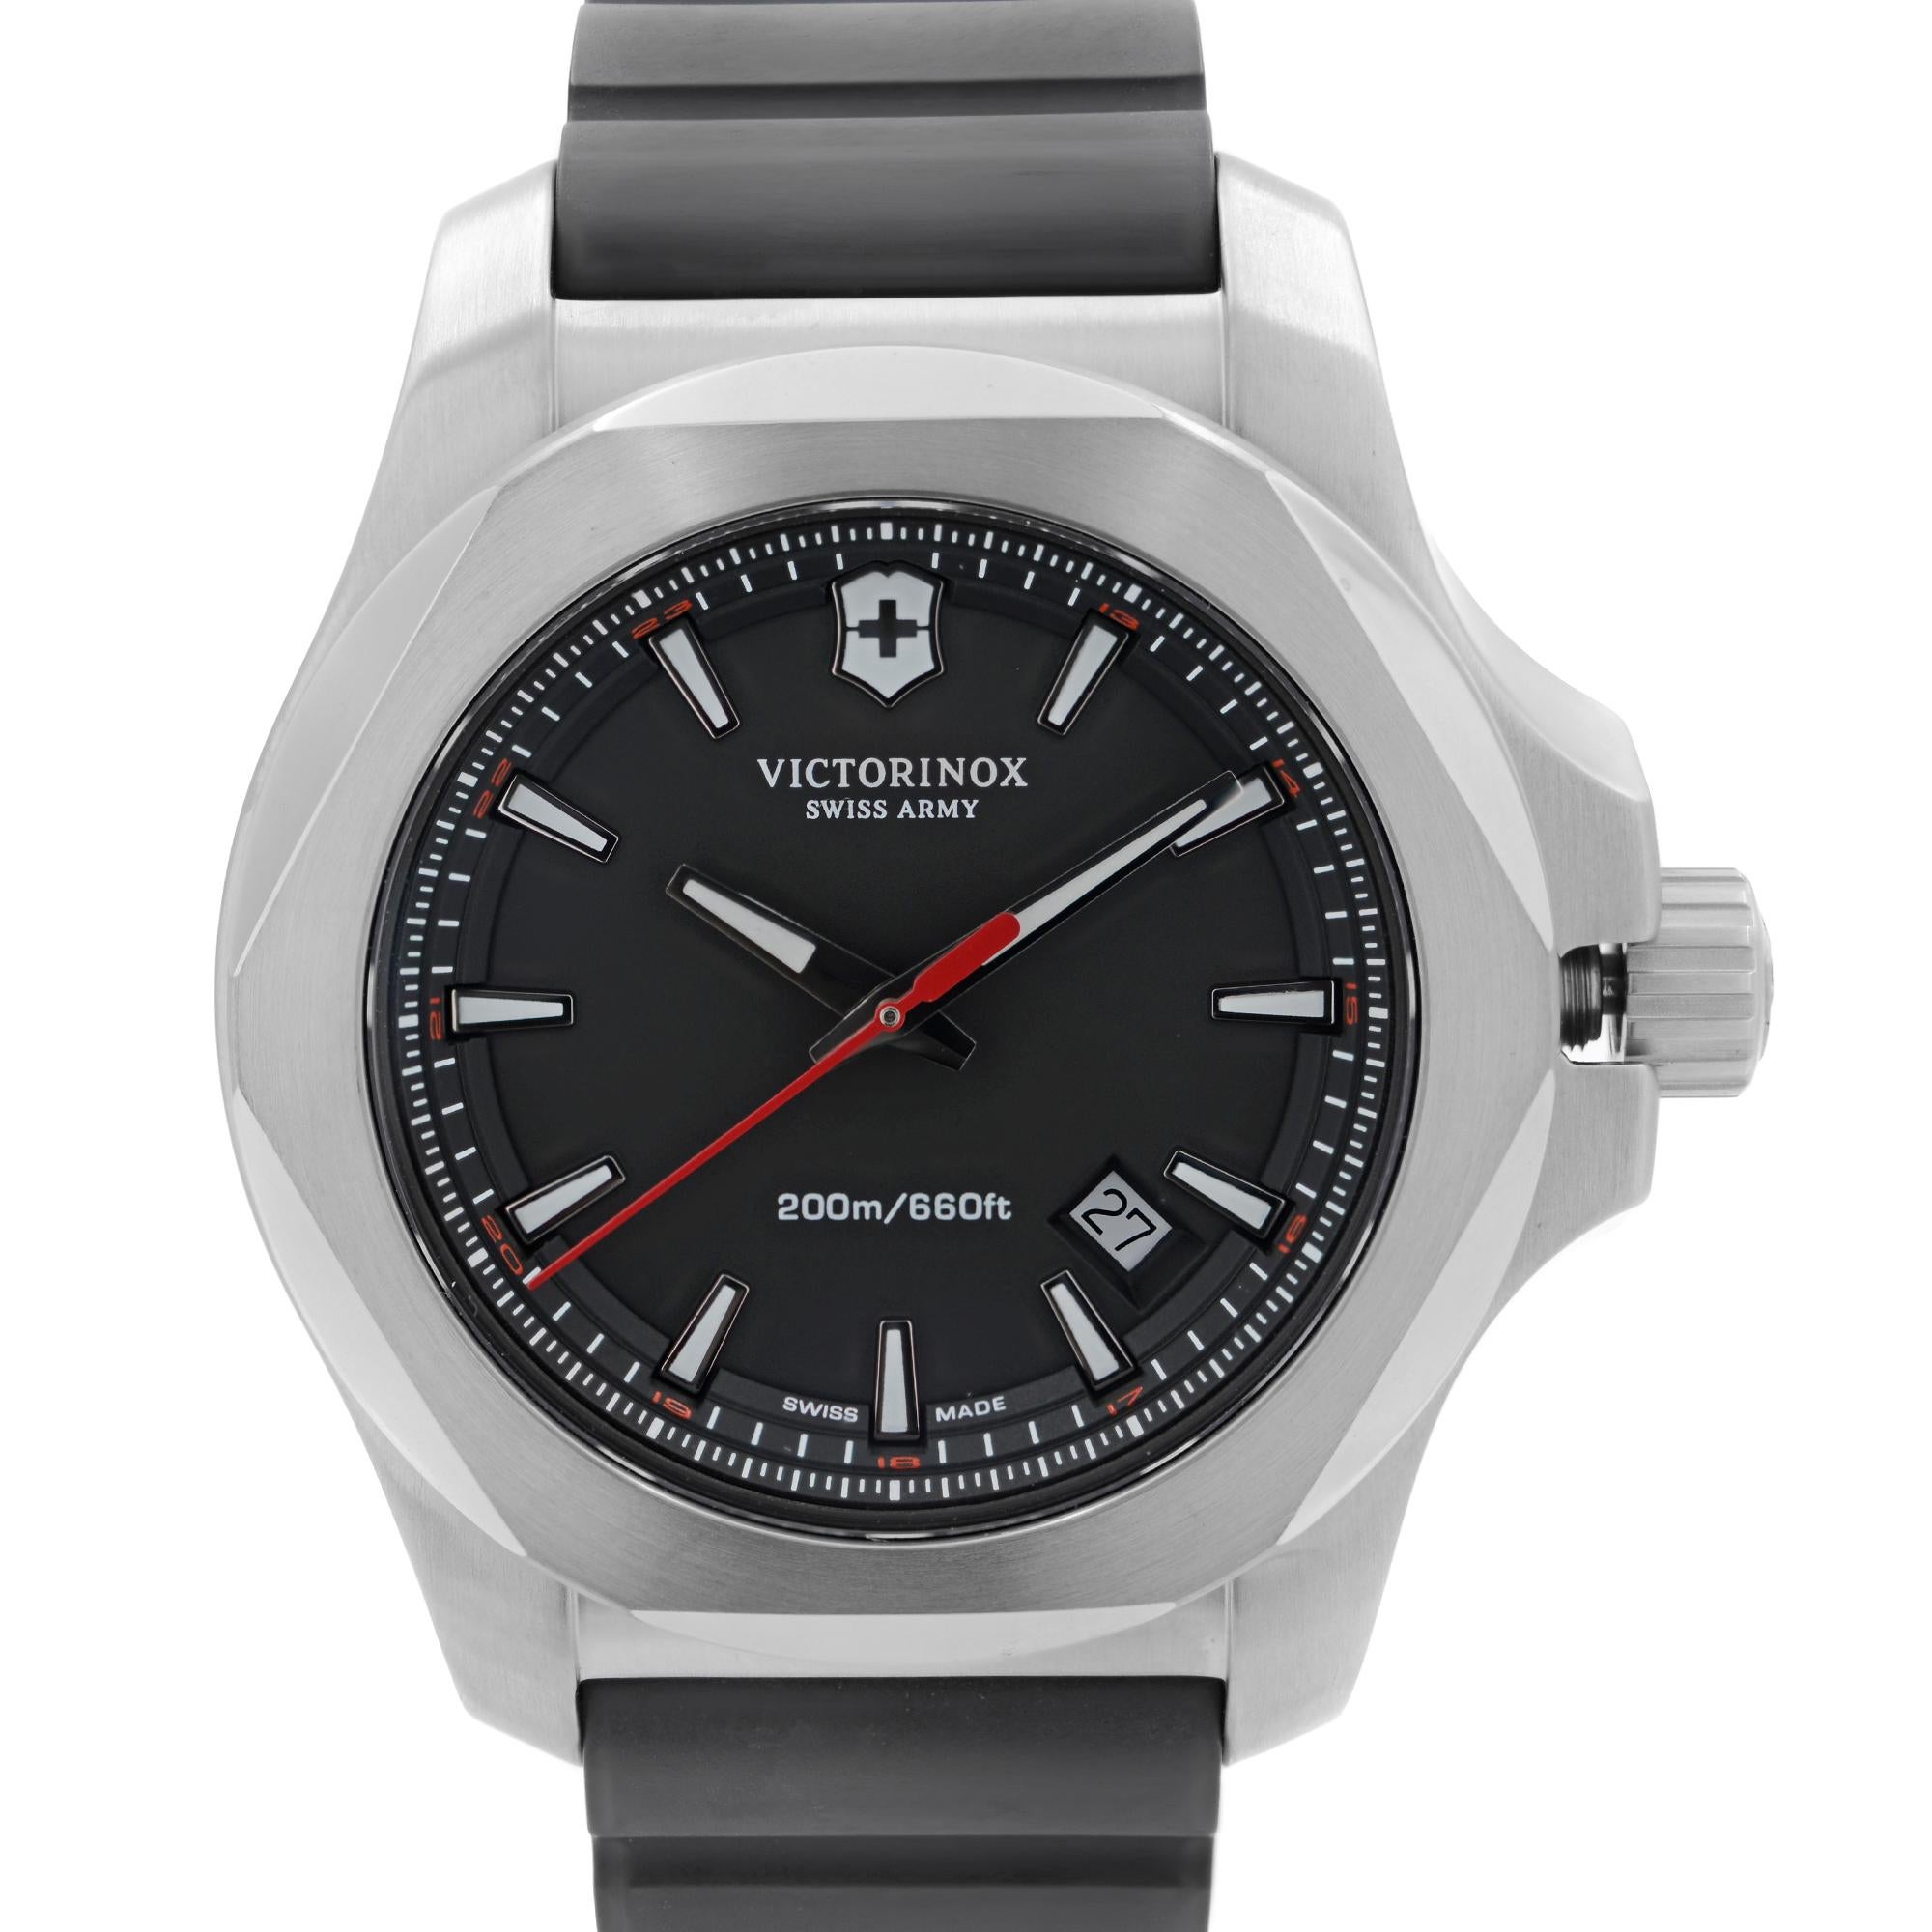 Display Model Victorinox Swiss Army I.N.O.X. Stainless Steel 43 mm Black Dial Men's Quartz Watch 241682.1. This Beautiful Timepiece Features: Brushed Stainless Steel Case and Two-Piece Rubber Strap. Fixed Stainless Steel Bezel. Black Dial with